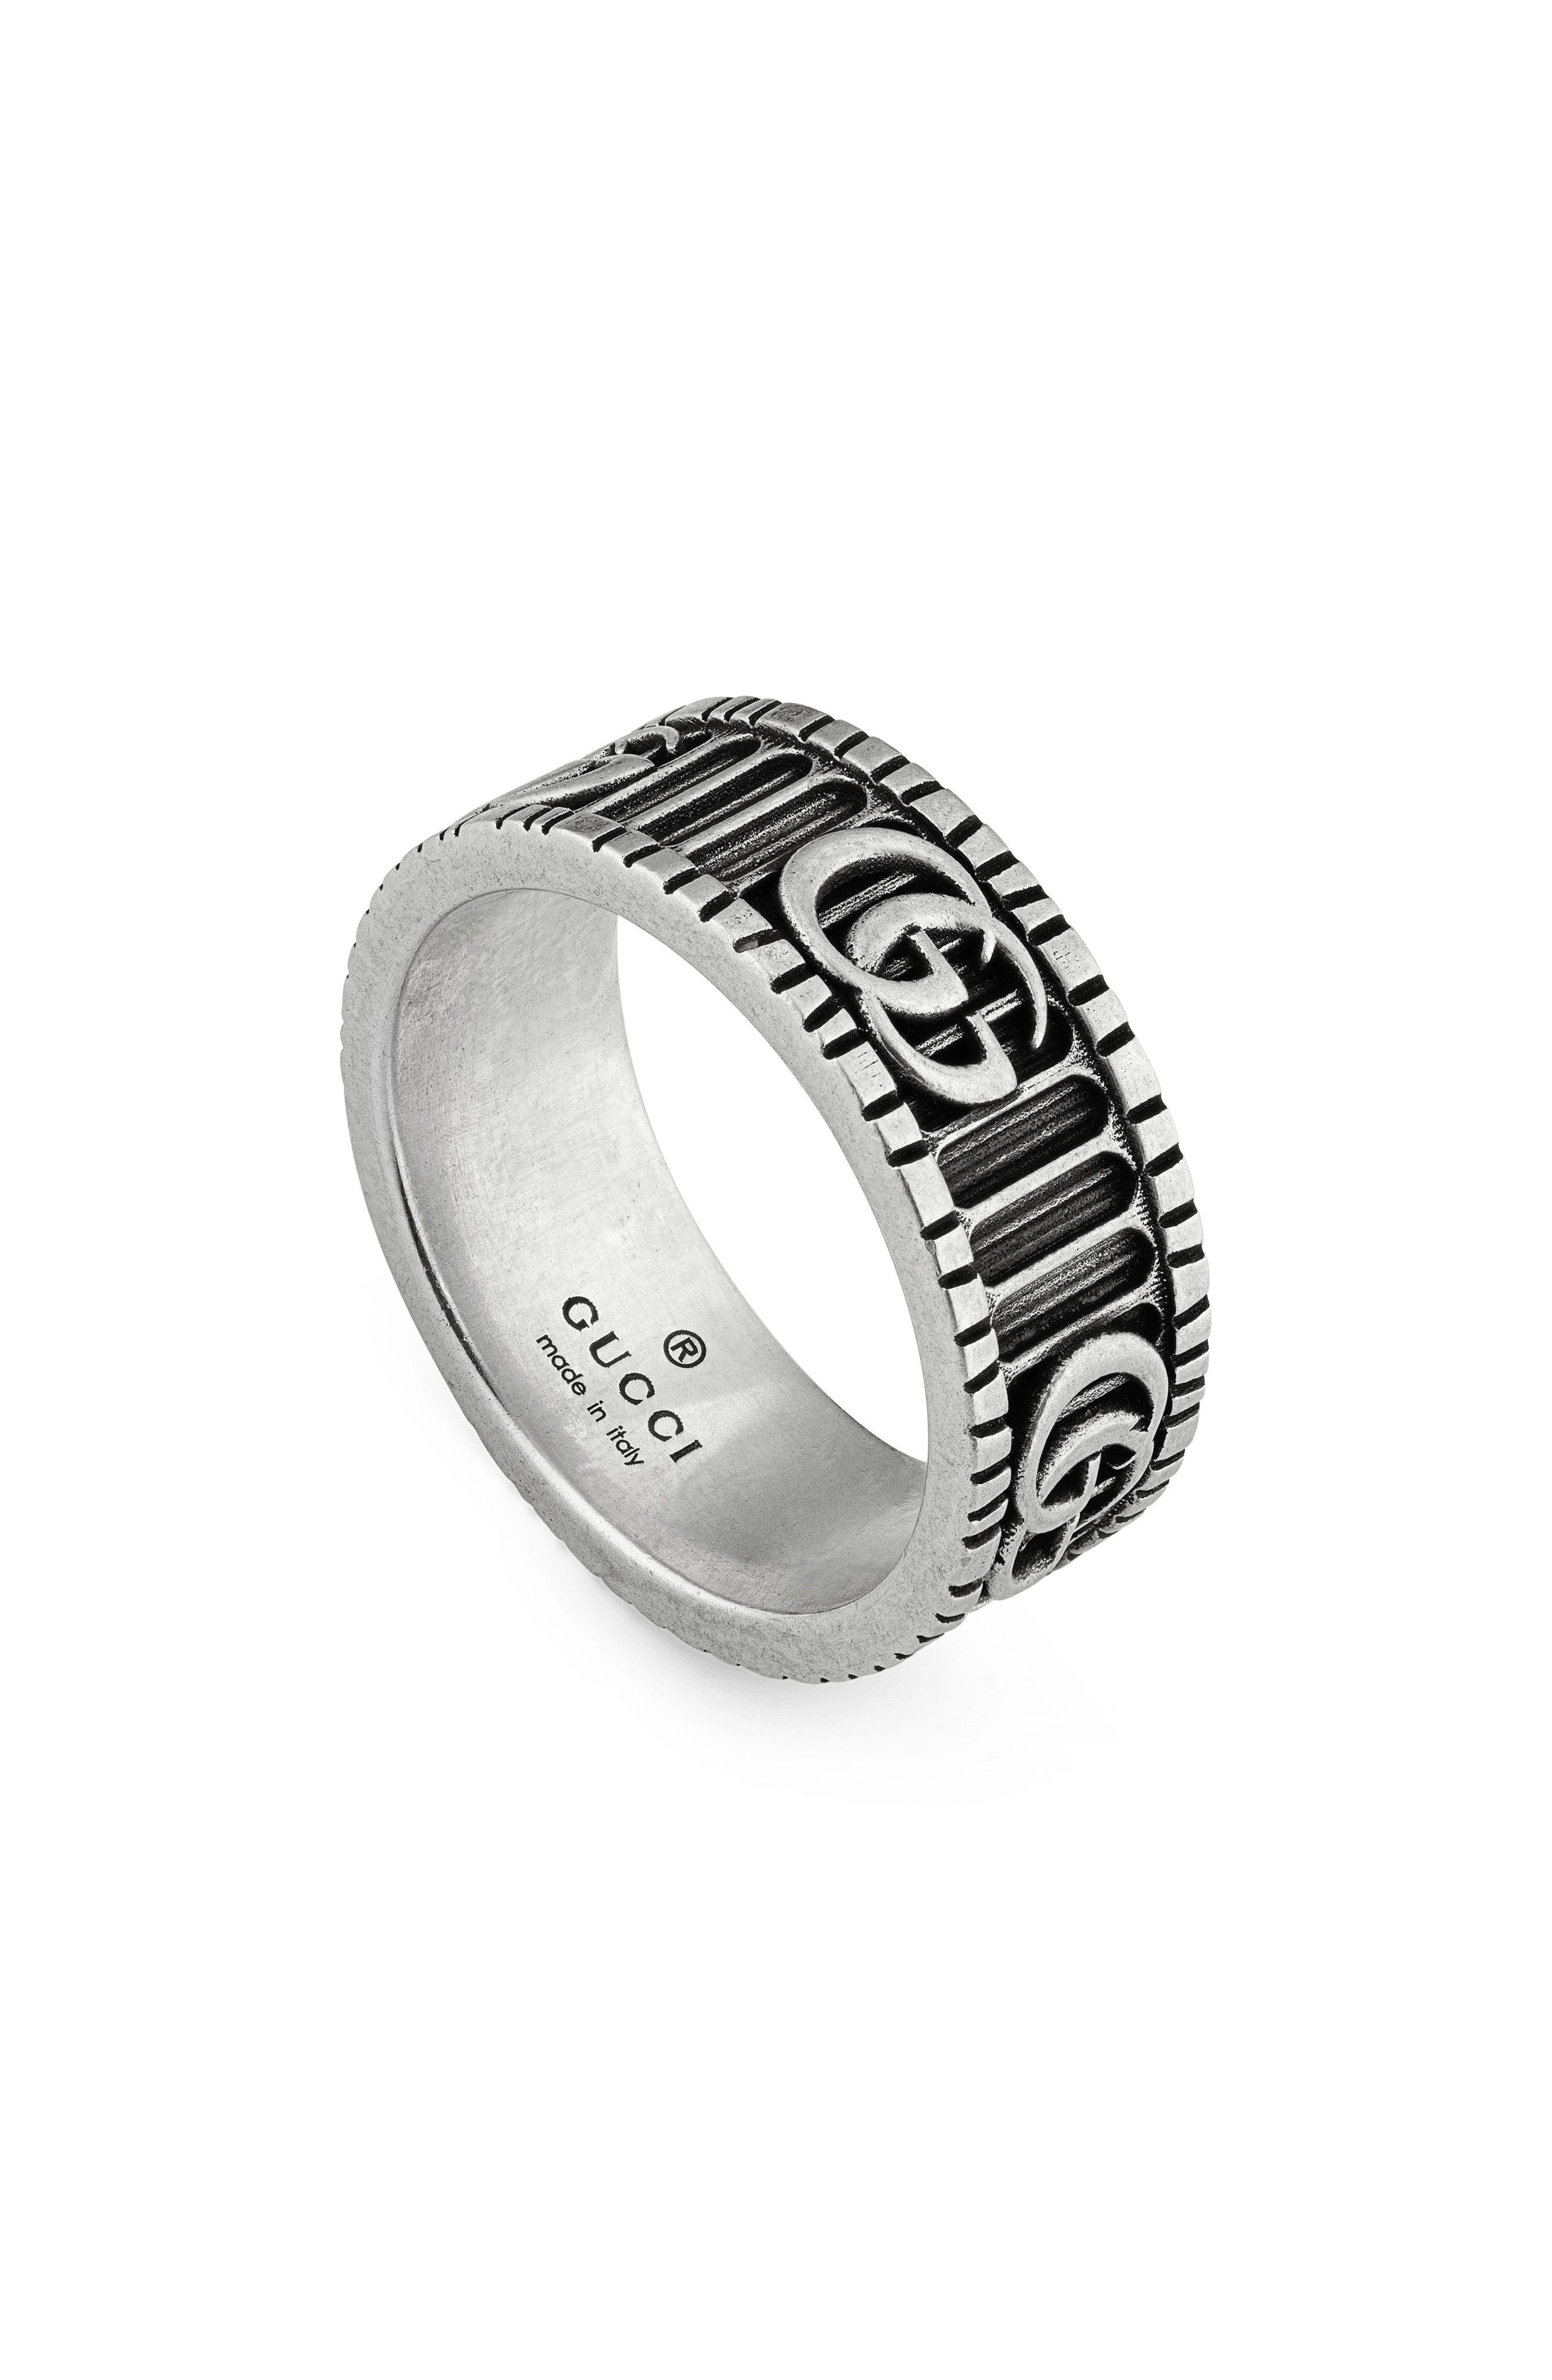 Lyst Gucci Gg Marmont Men's Band Ring in Metallic for Men